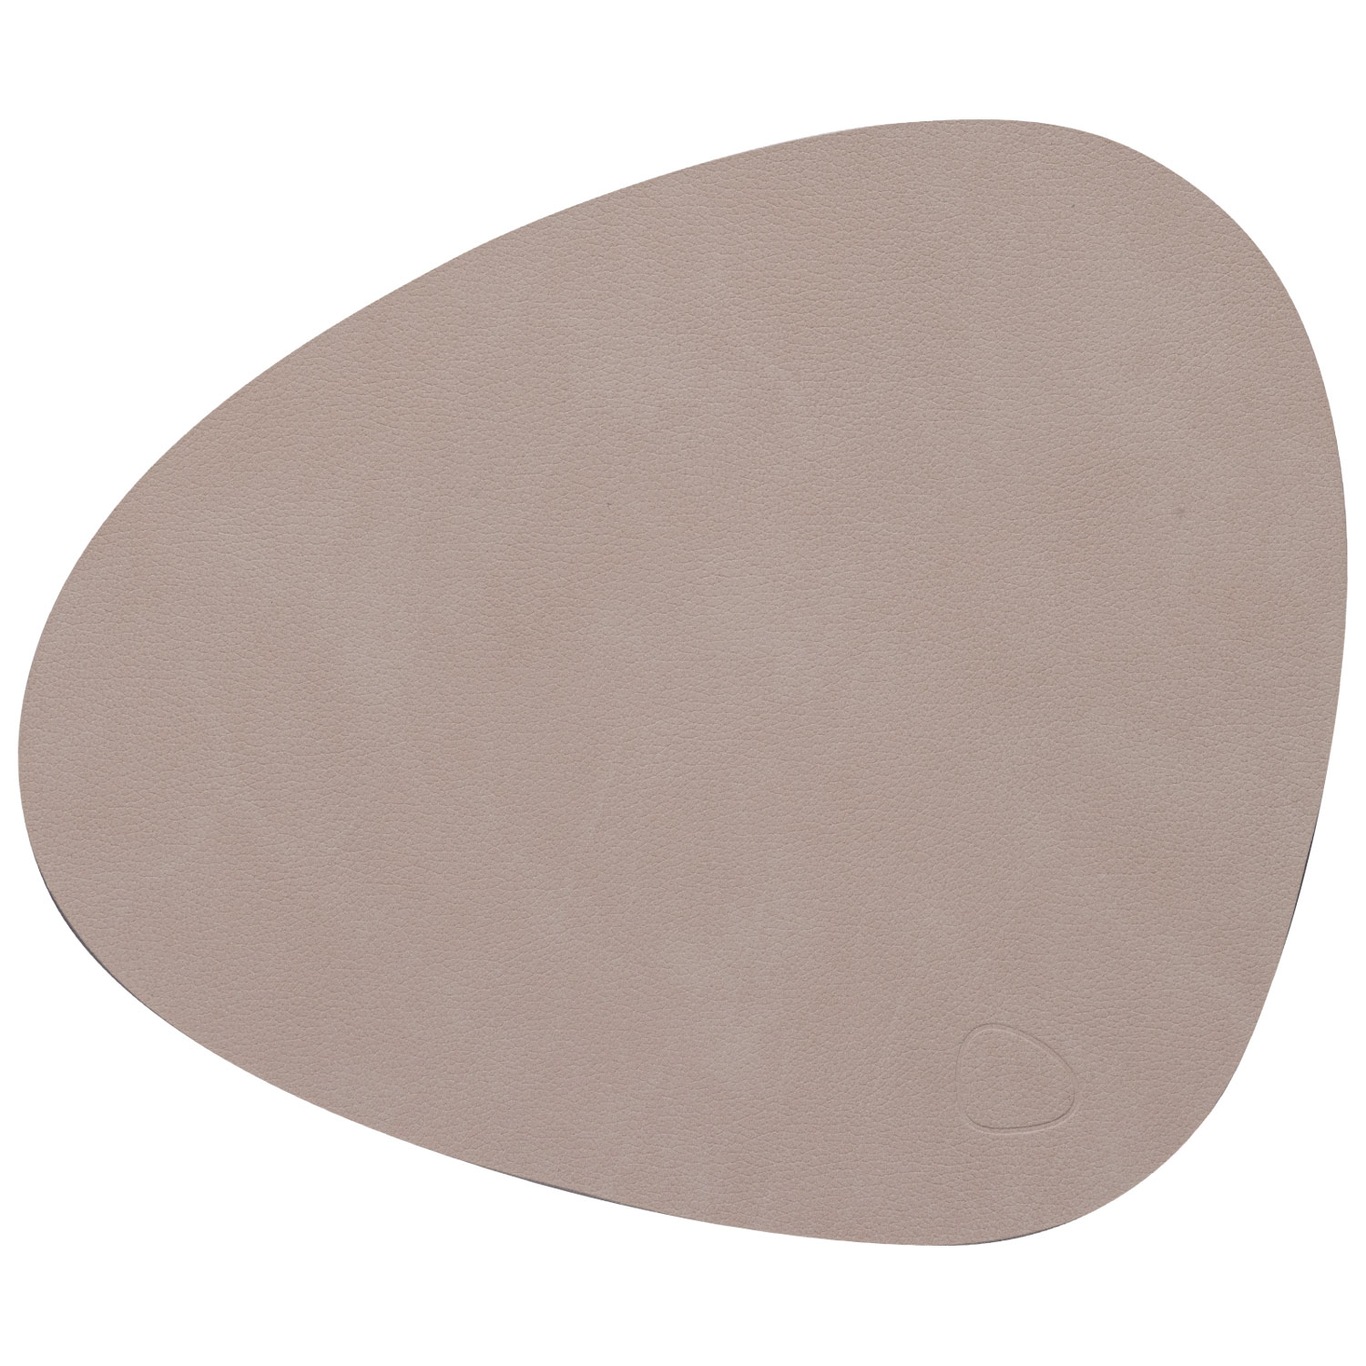 Curve Placemat Nupo 24x28 cm, Clay Brown